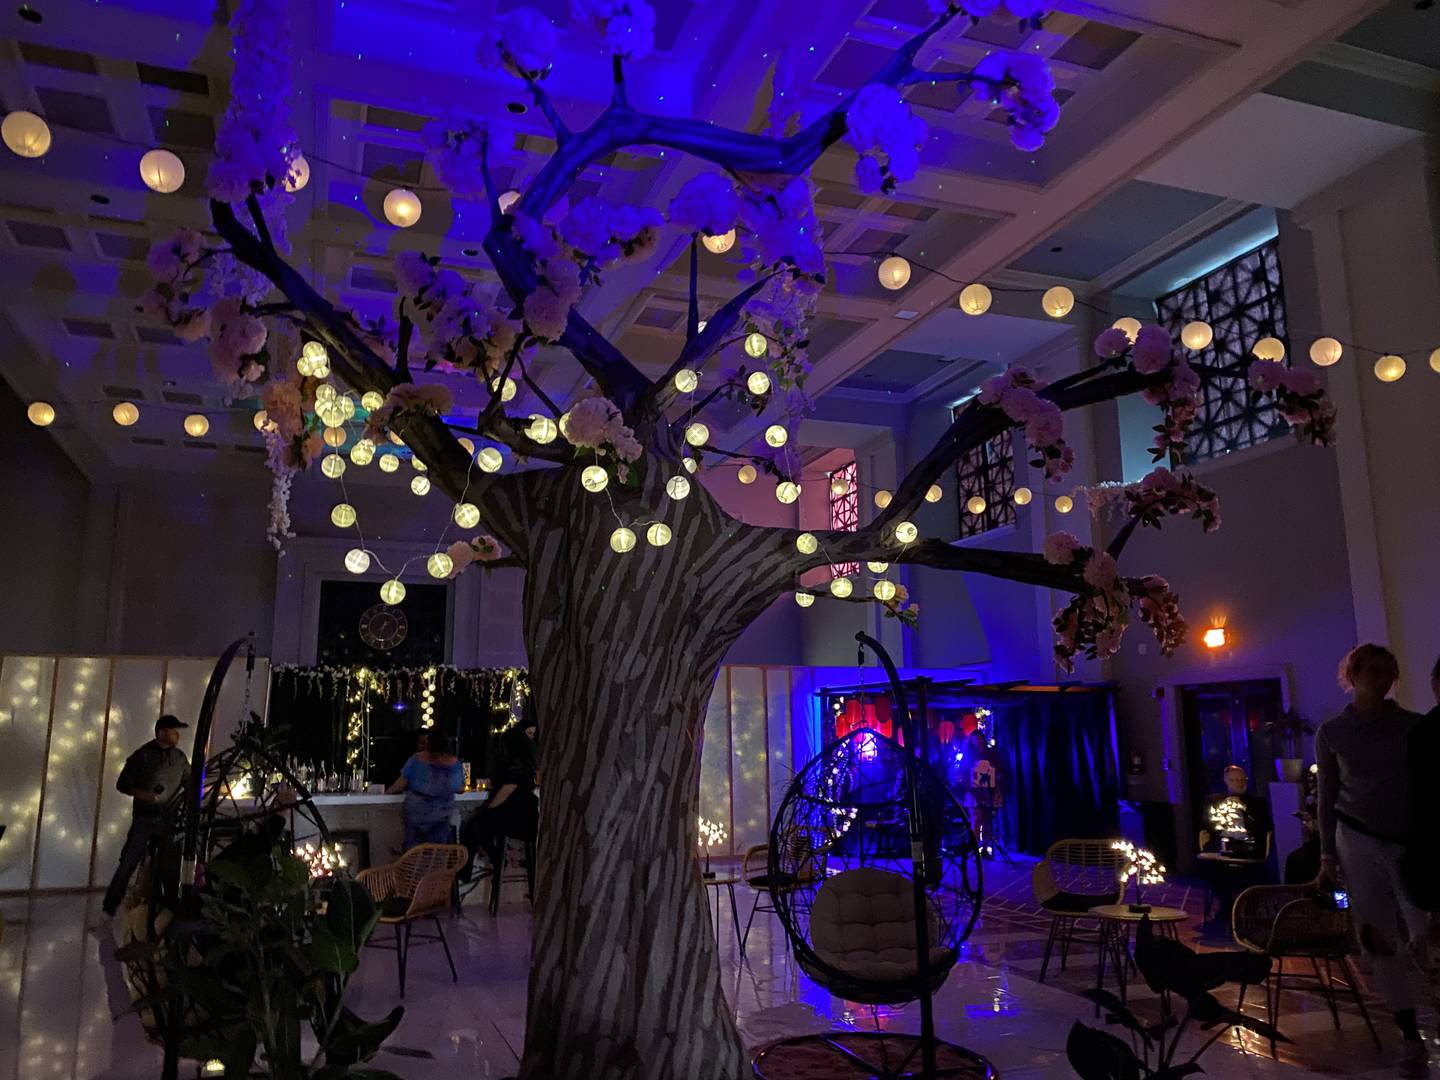 Scenes from inside Downtown Partnership’s Cherry Blossom Pop-Up Bar, held in a long-vacant bank building.